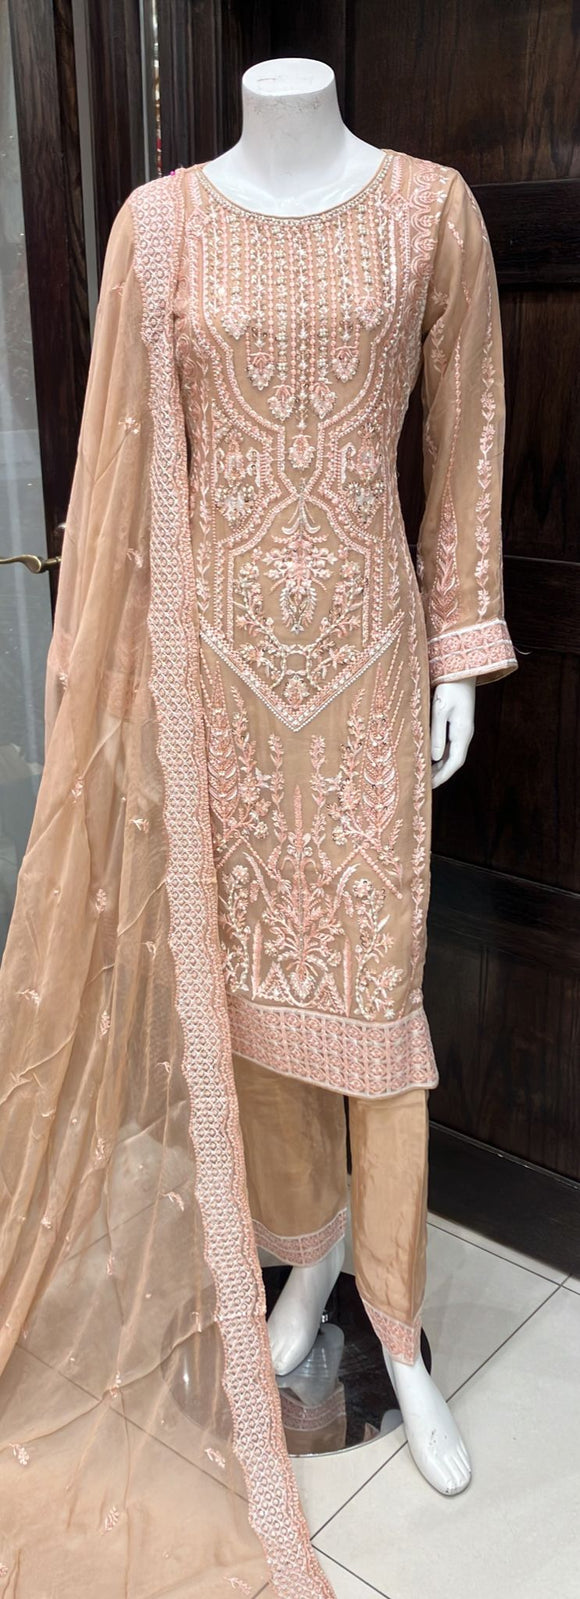 EMBROIDERED CHIFFON 3 PIECE SUIT 478E